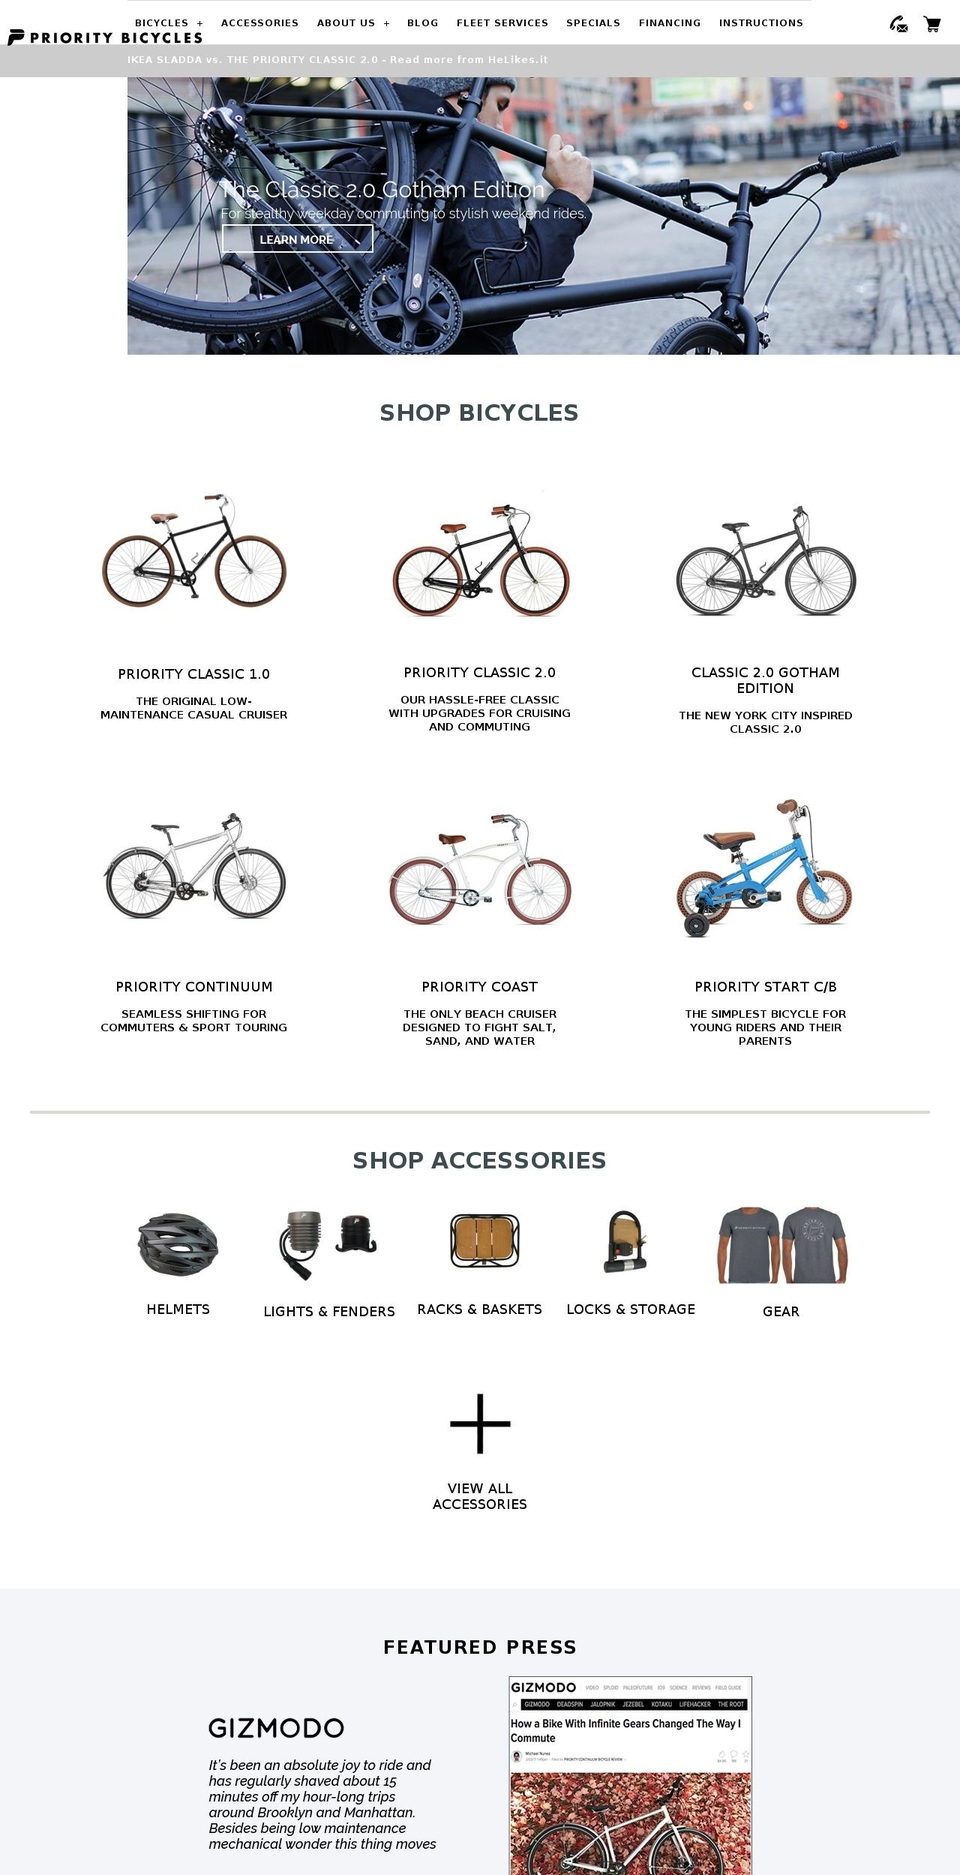 Priority . Shopify theme site example prioritybicycles.com